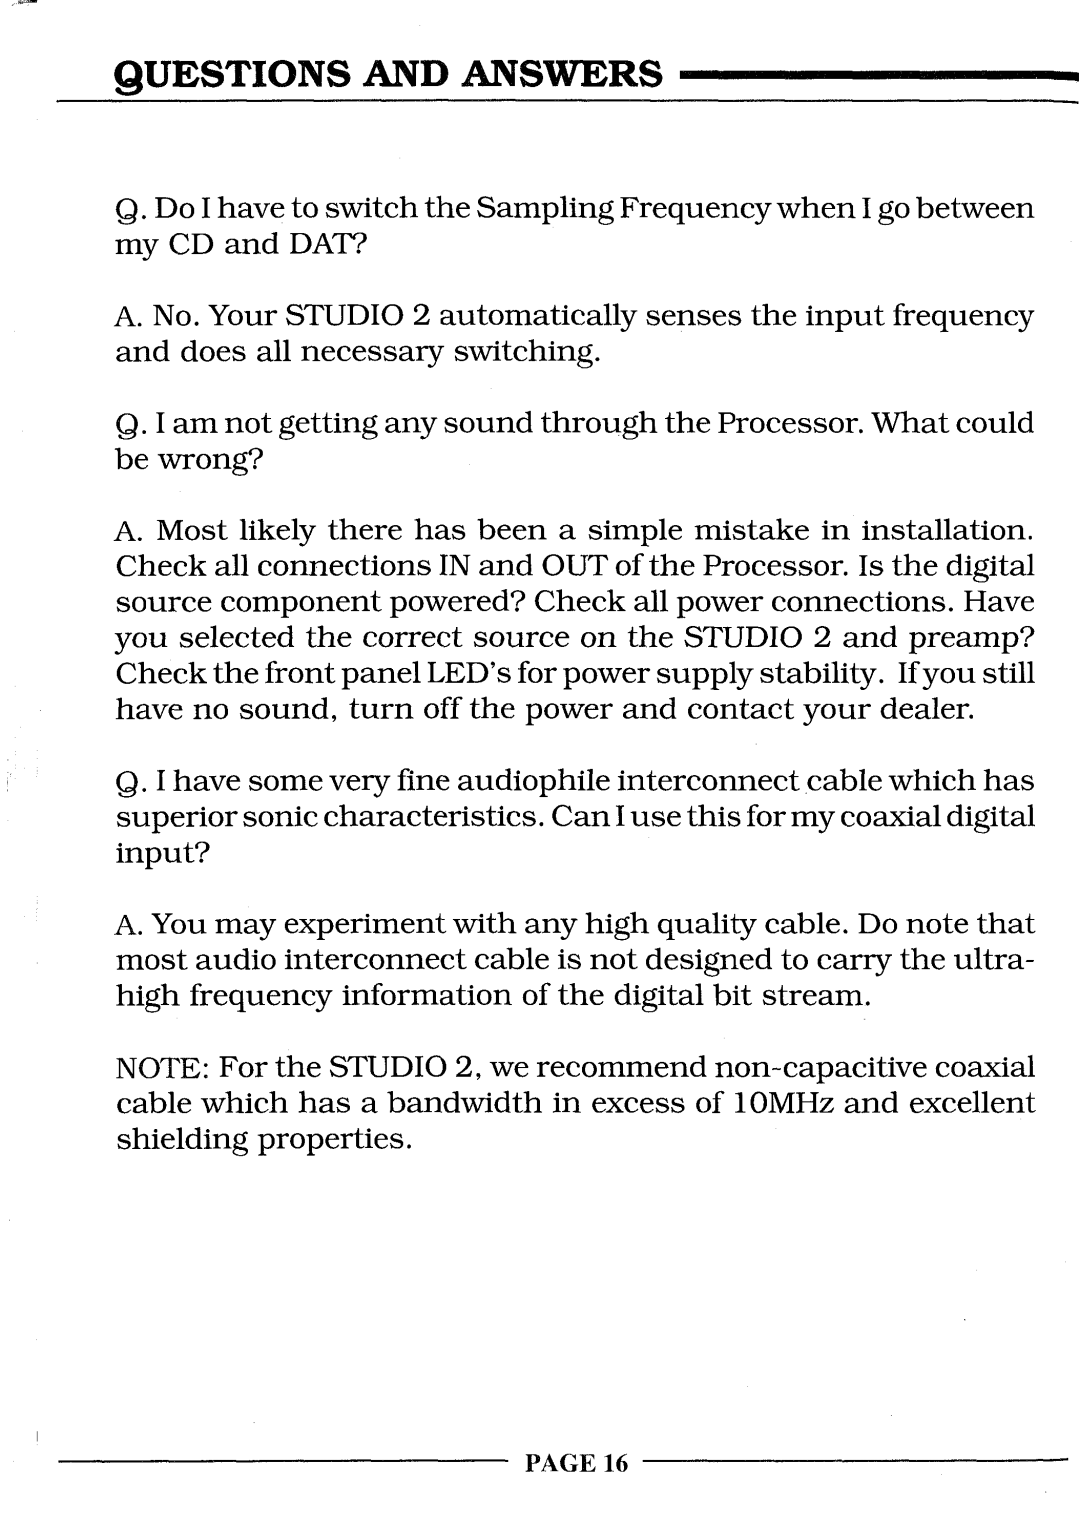 Krell Industries STUDIO 2 manual Questions And Answers, PAGE16 